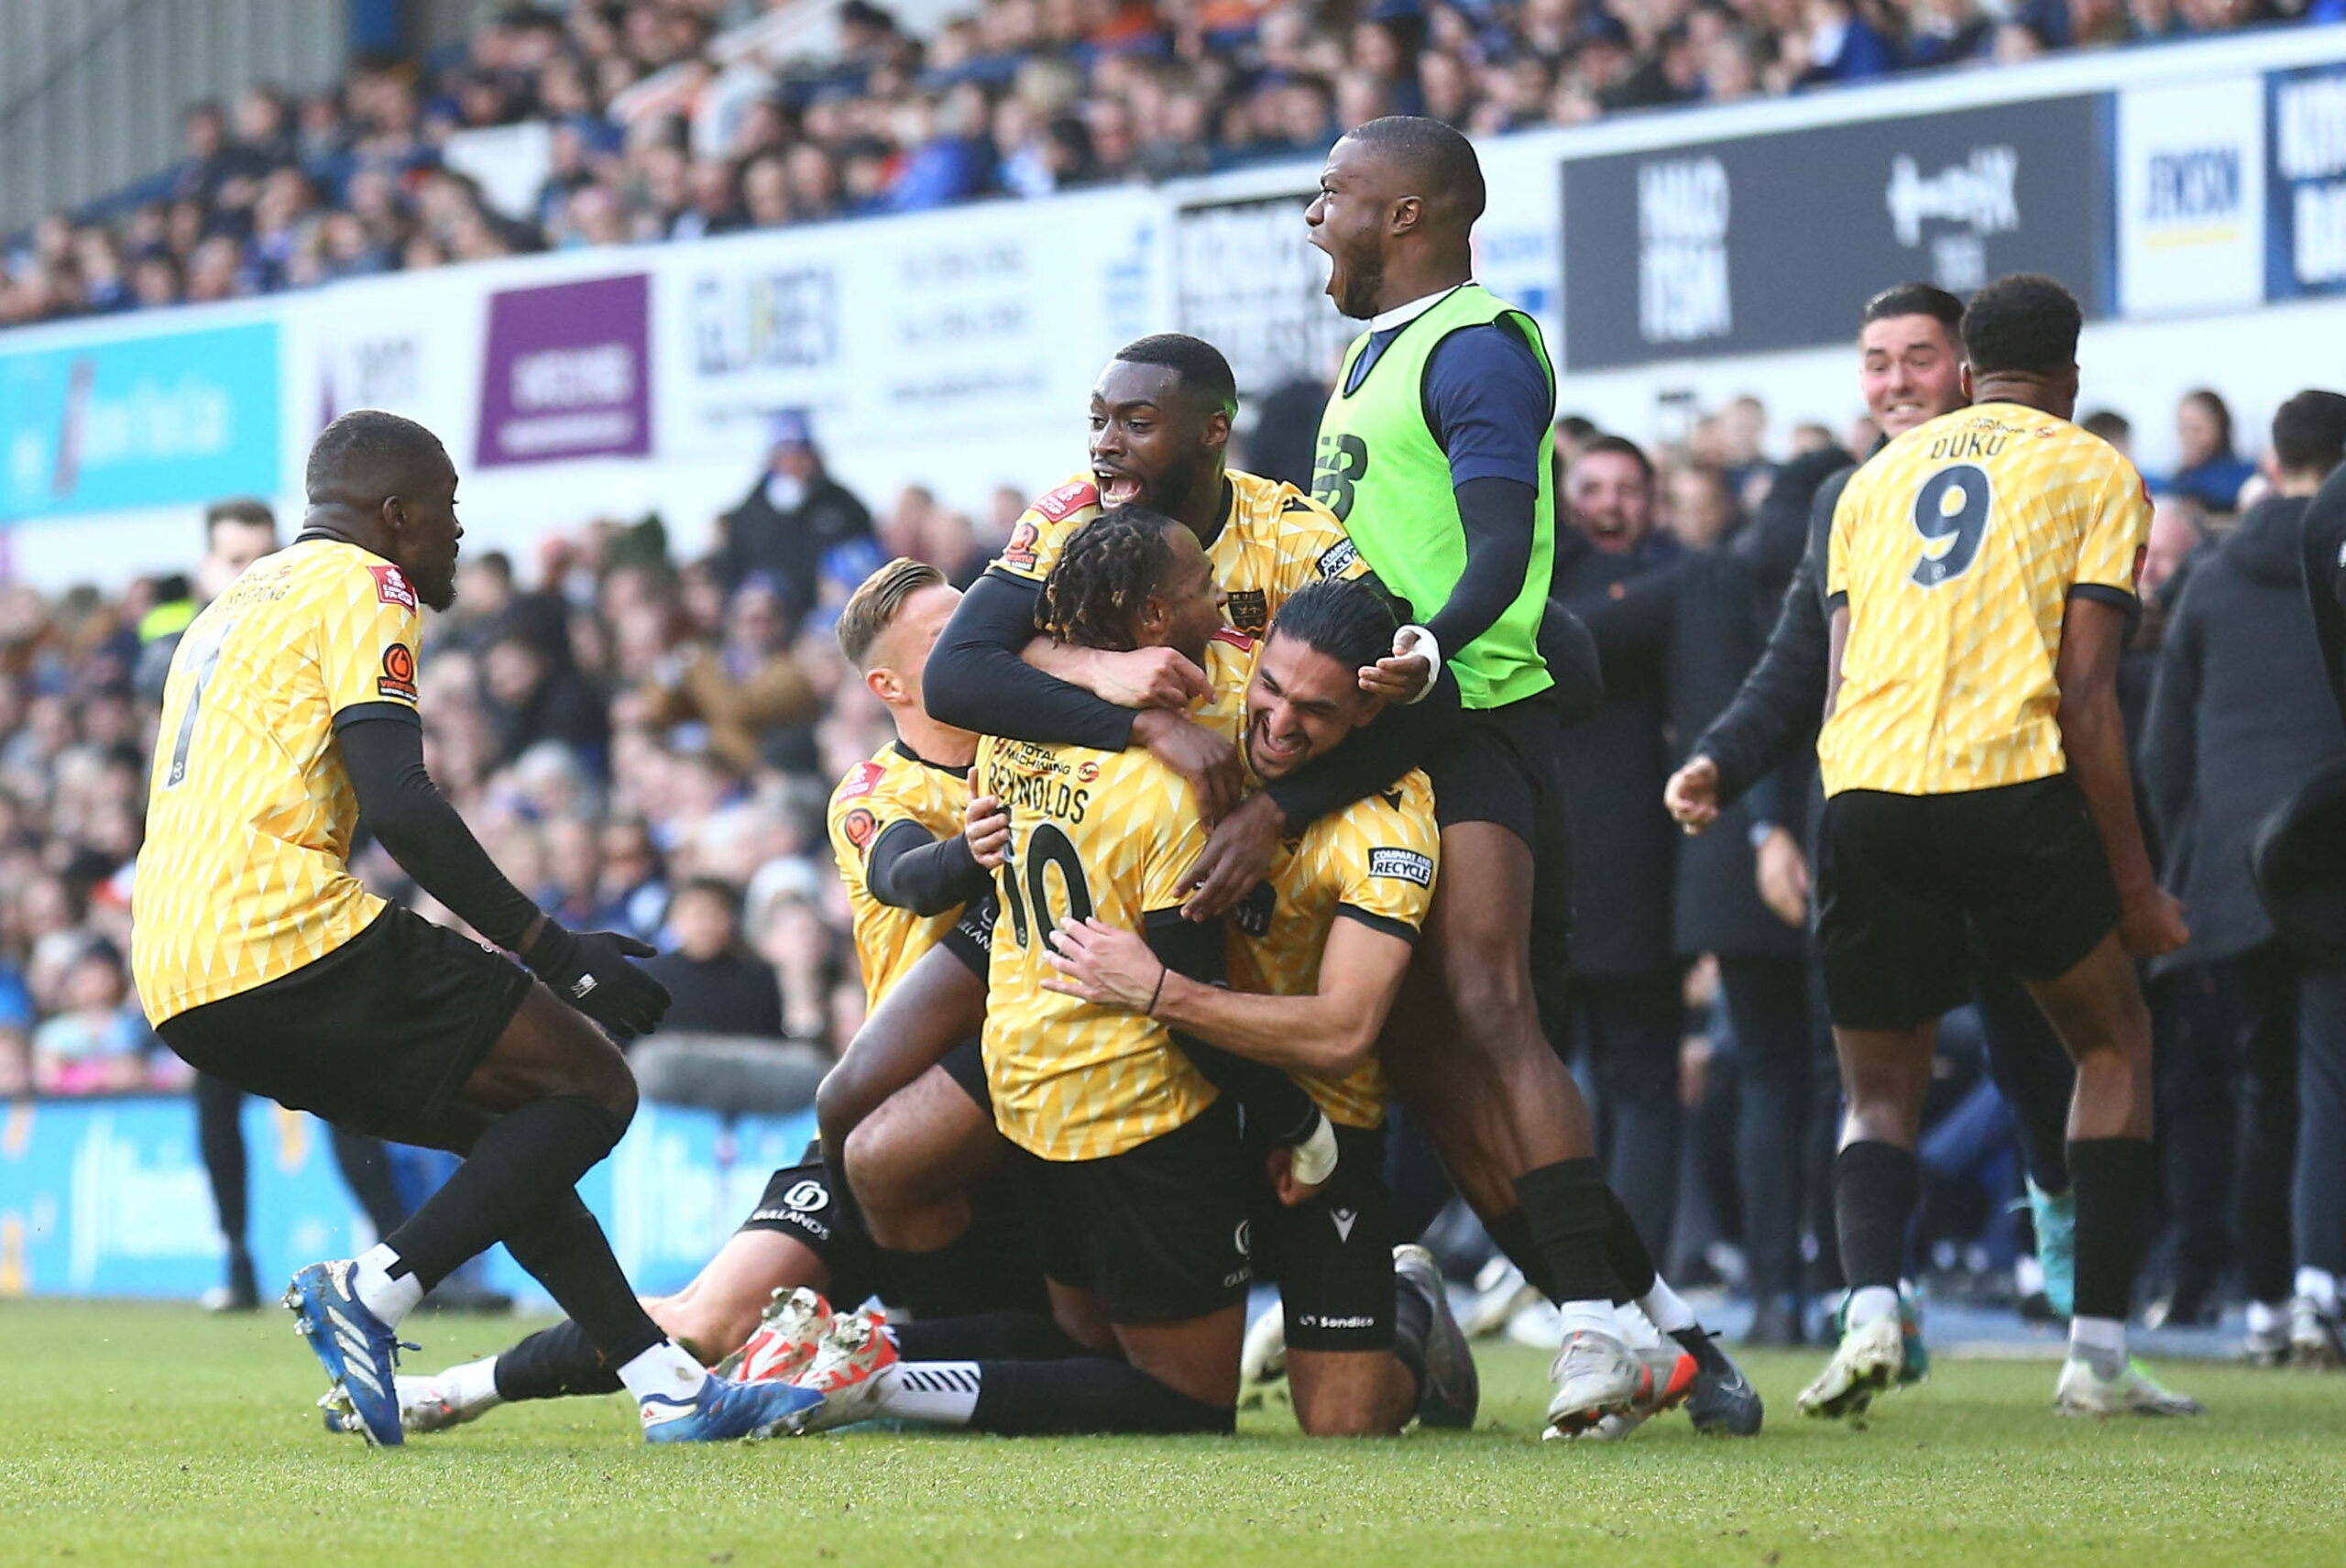 Ipswich Town v Maidstone United Emirates FA Cup Lamar Reynolds of Maidstone United celebrates scoring their first goal with team mates during the Emirates FA Cup Fourth Round match at Portman Road, Ipswich Copyright: xLucyxCopseyx FIL-19574-0011